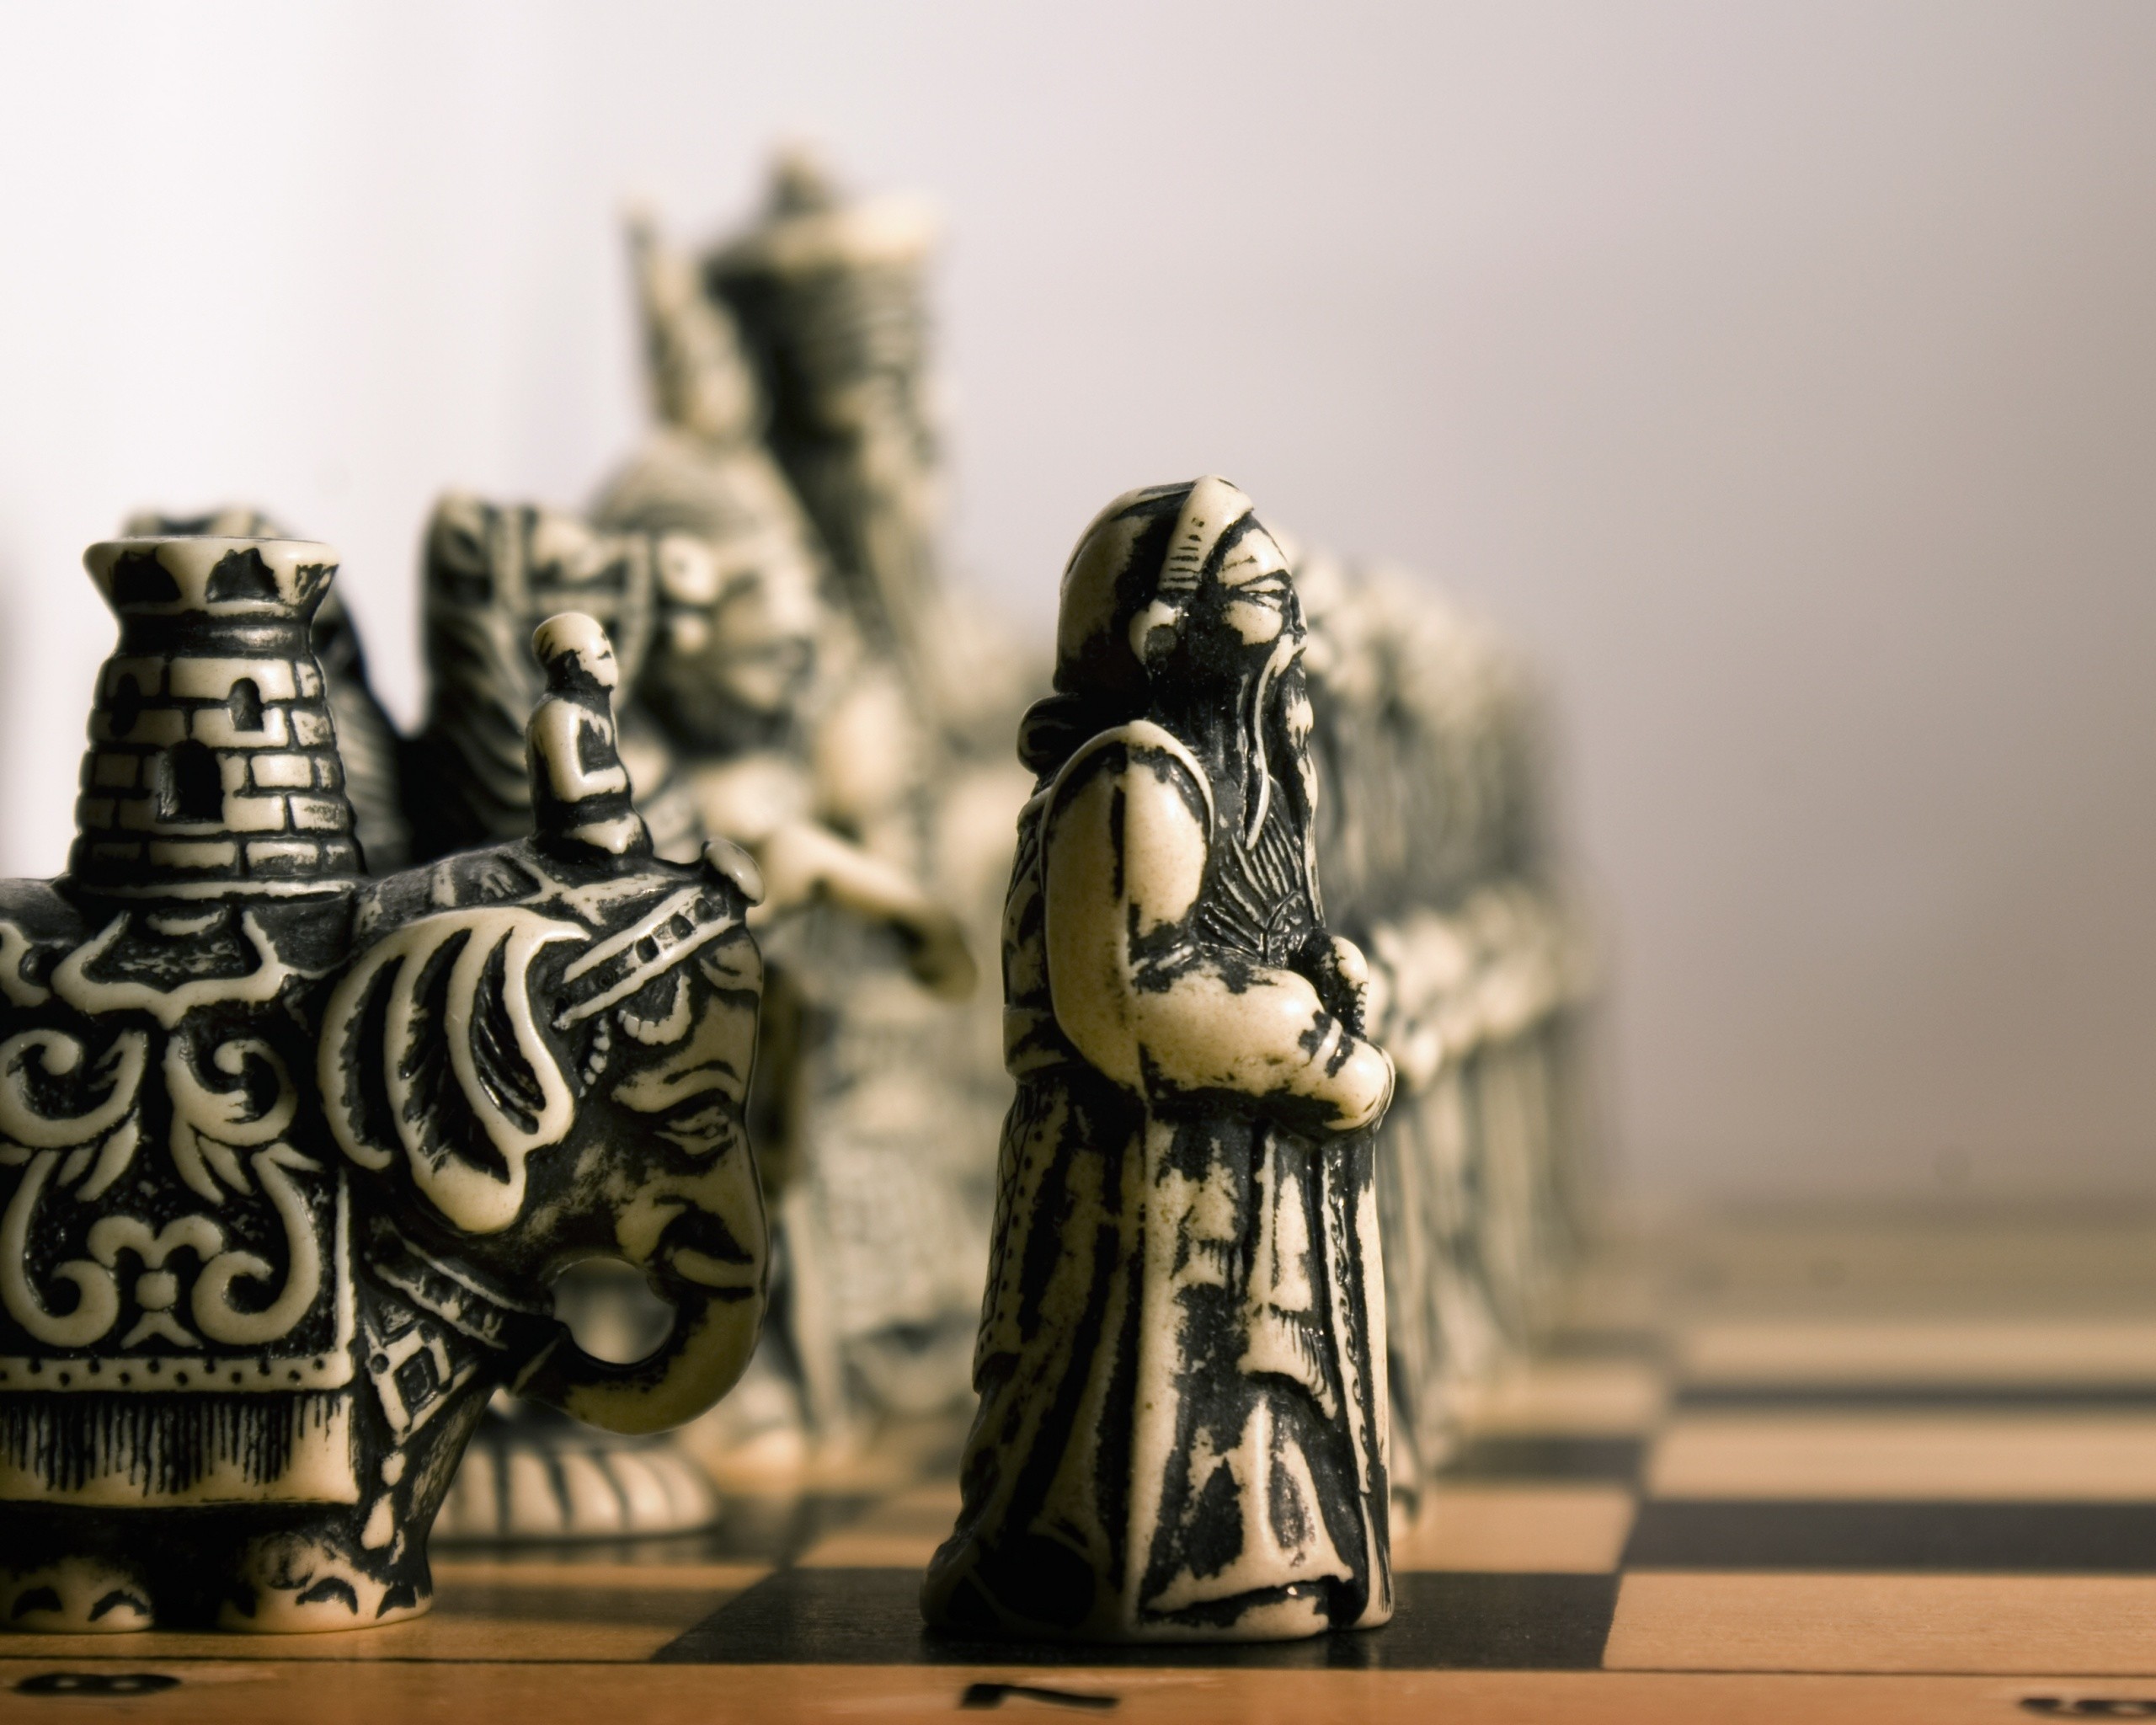 2560x2048 Chinese chess pieces